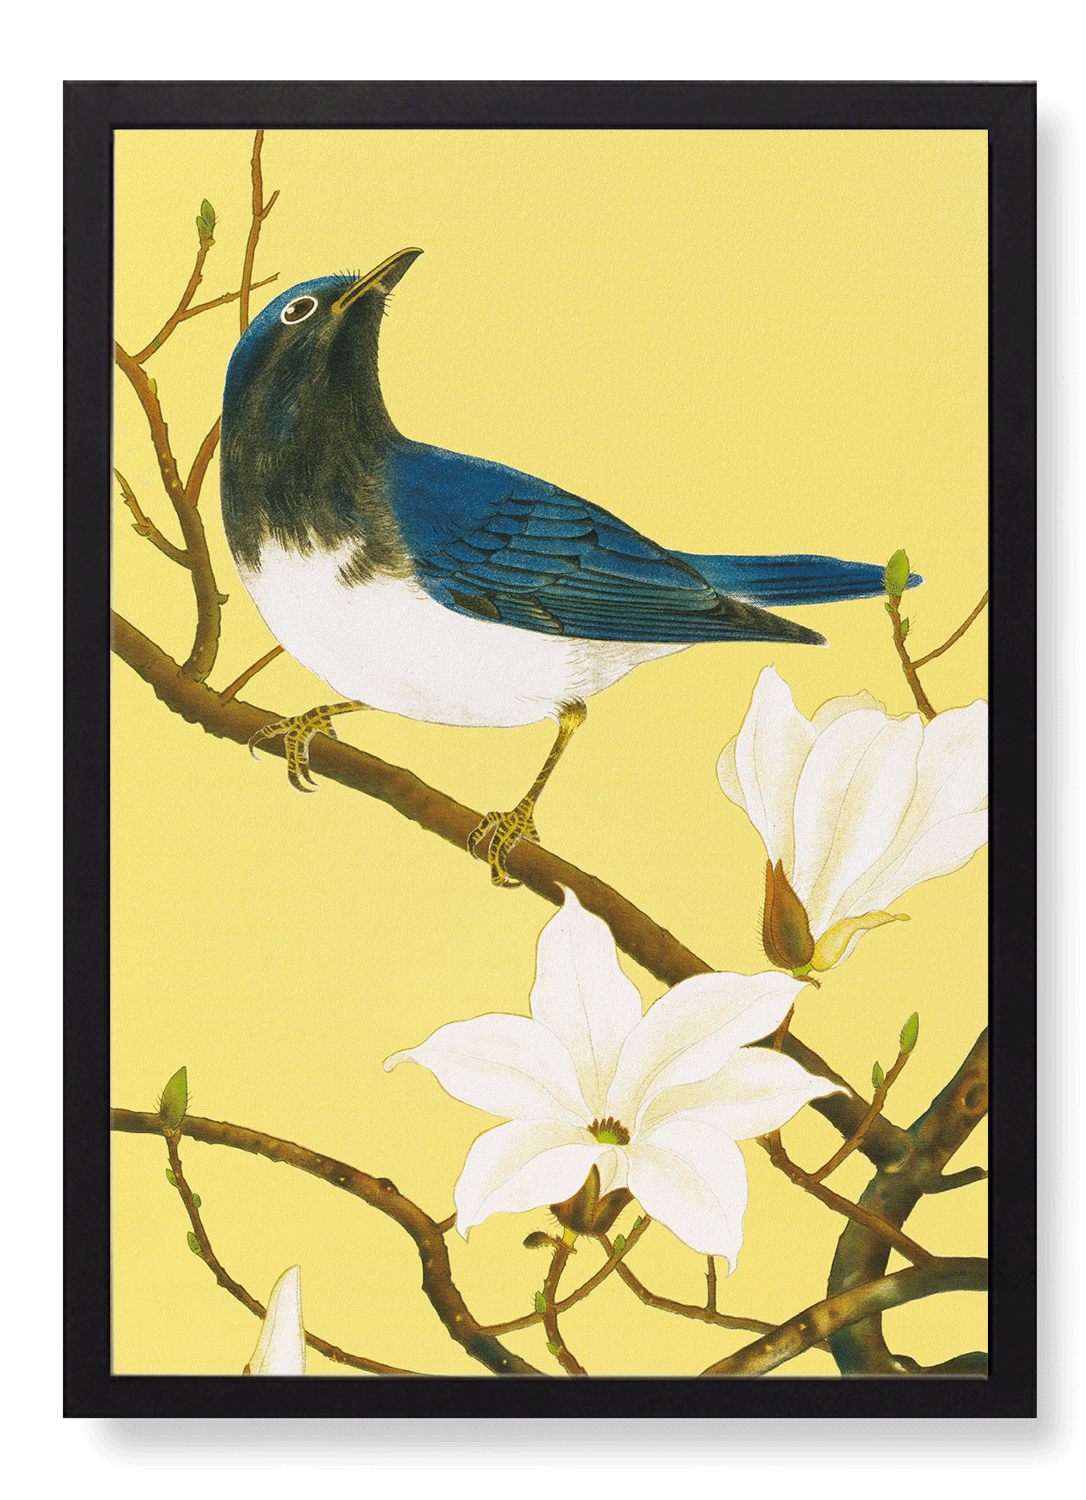 BLUE-AND-WHITE FLYCATCHER AND MAGNOLIA TREE (C.1930)